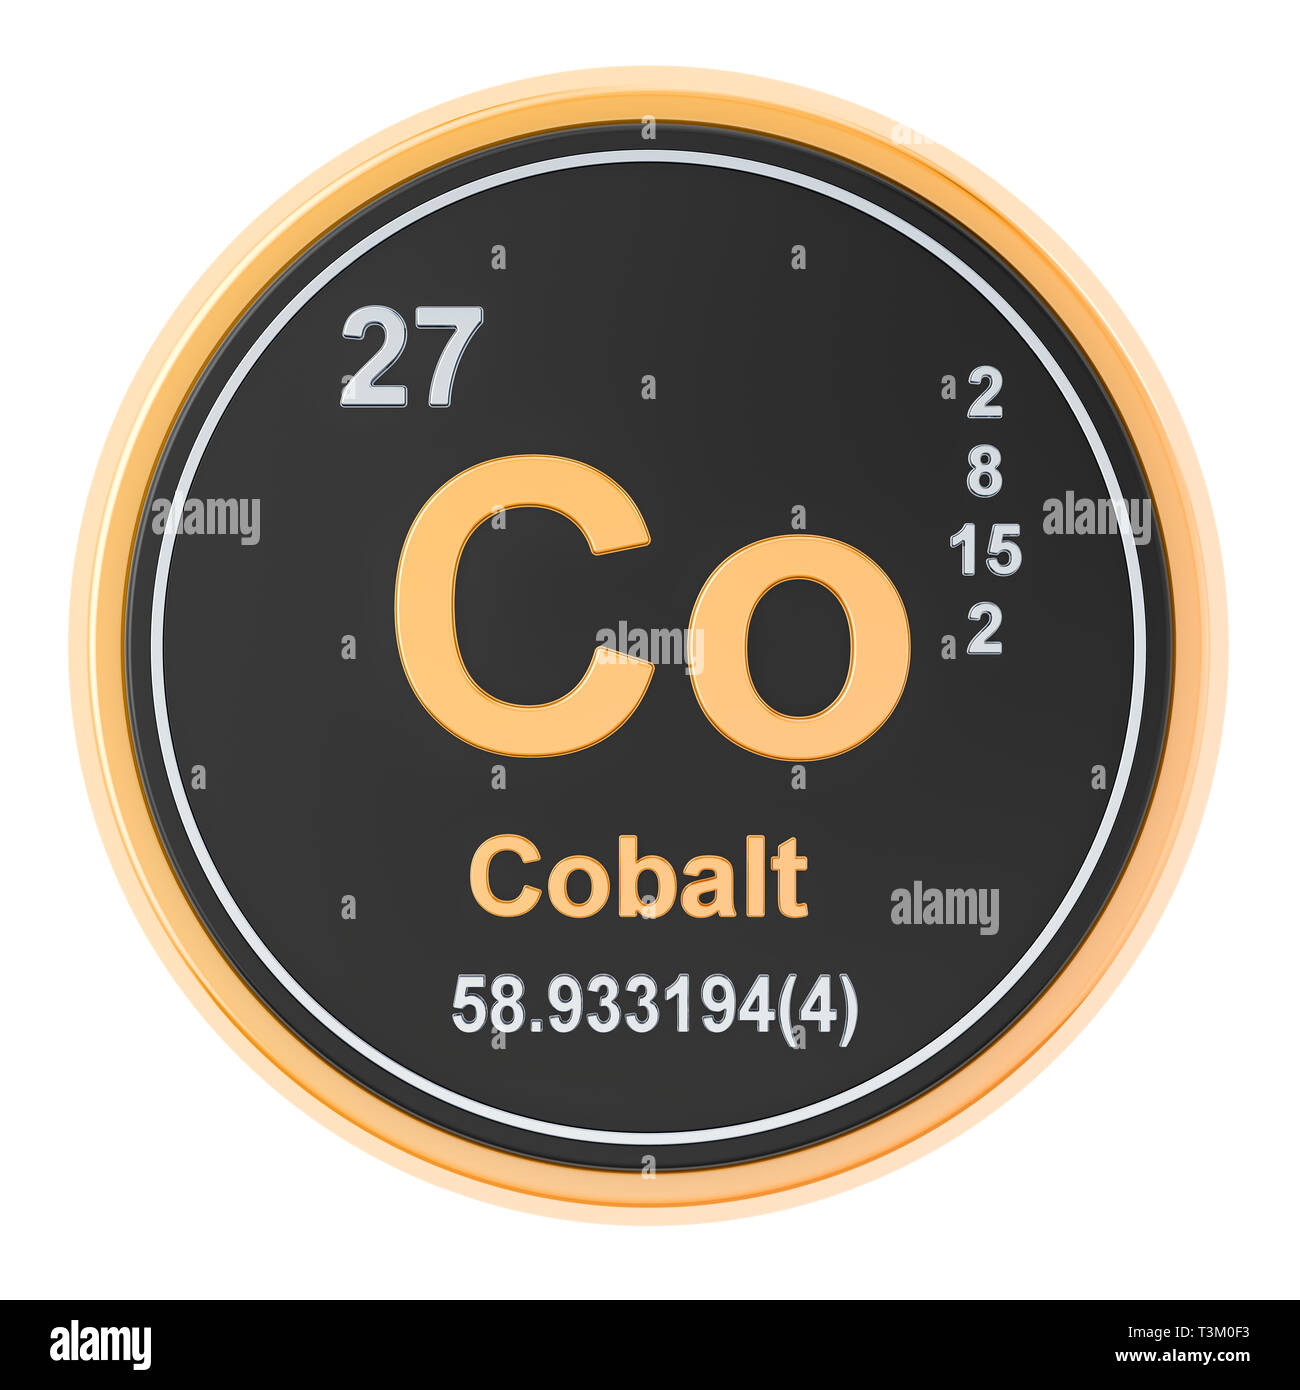 Cobalt Co chemical element. 3D rendering isolated on white background Stock Photo